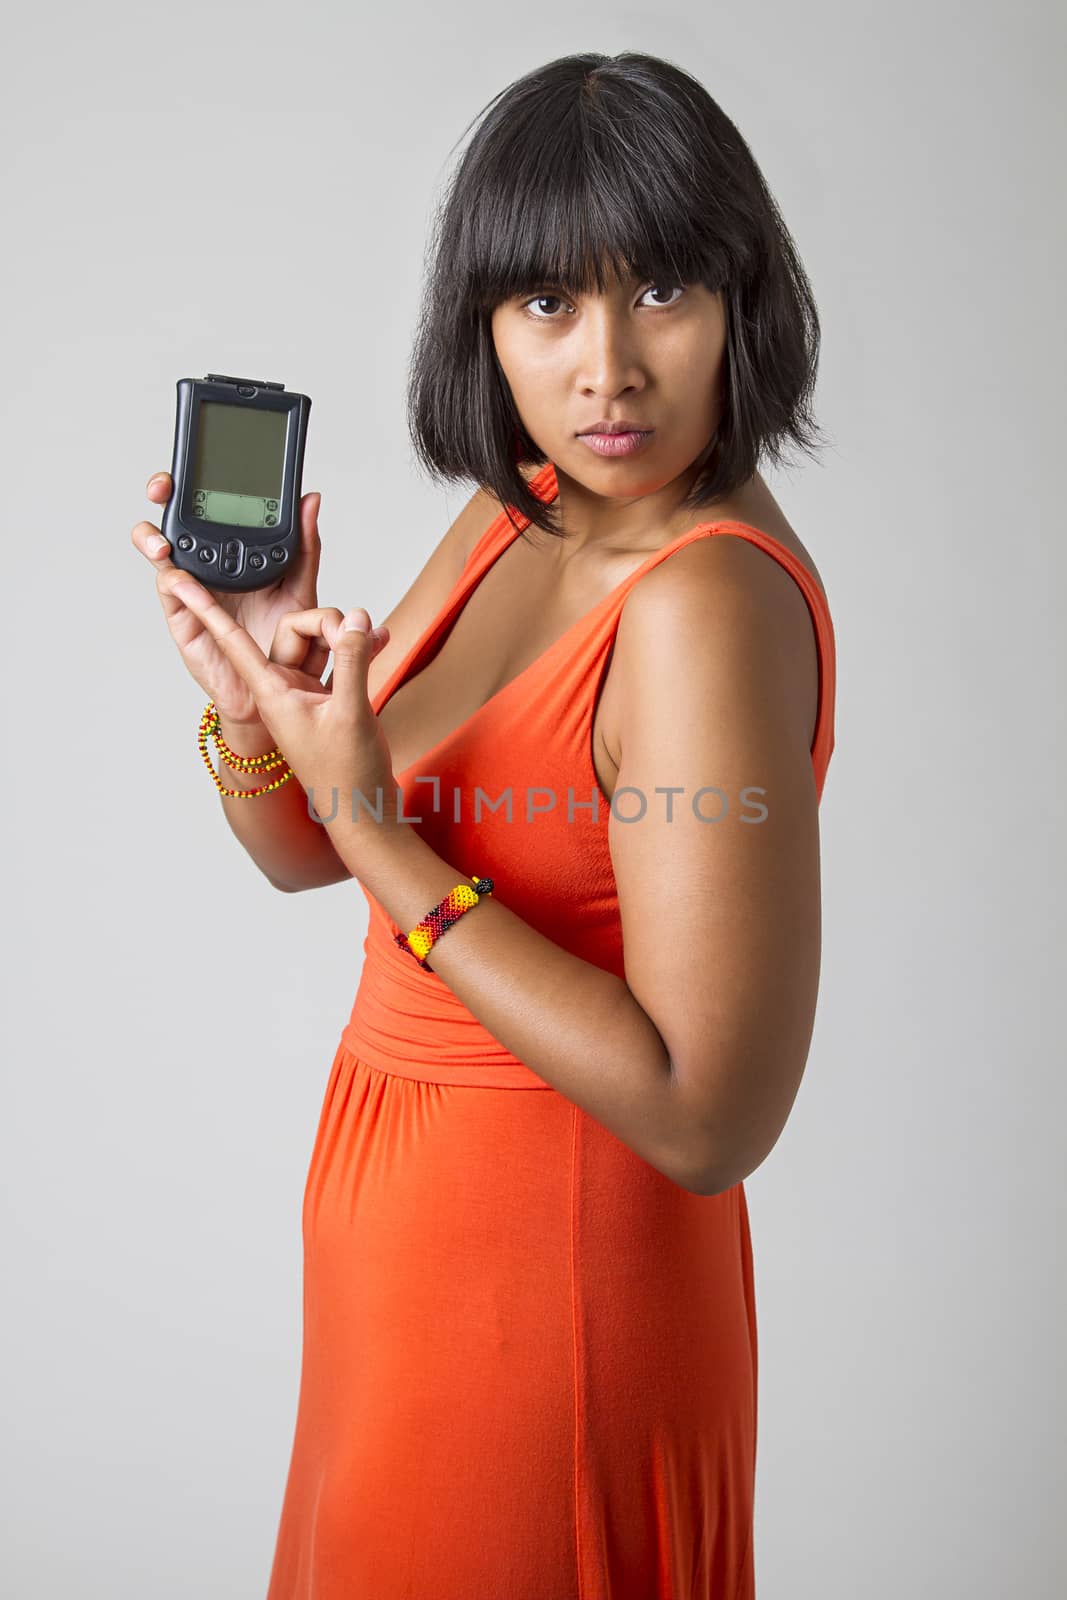 Young asian woman wearing a low cut orange dress, holding up an old personal digital assistant